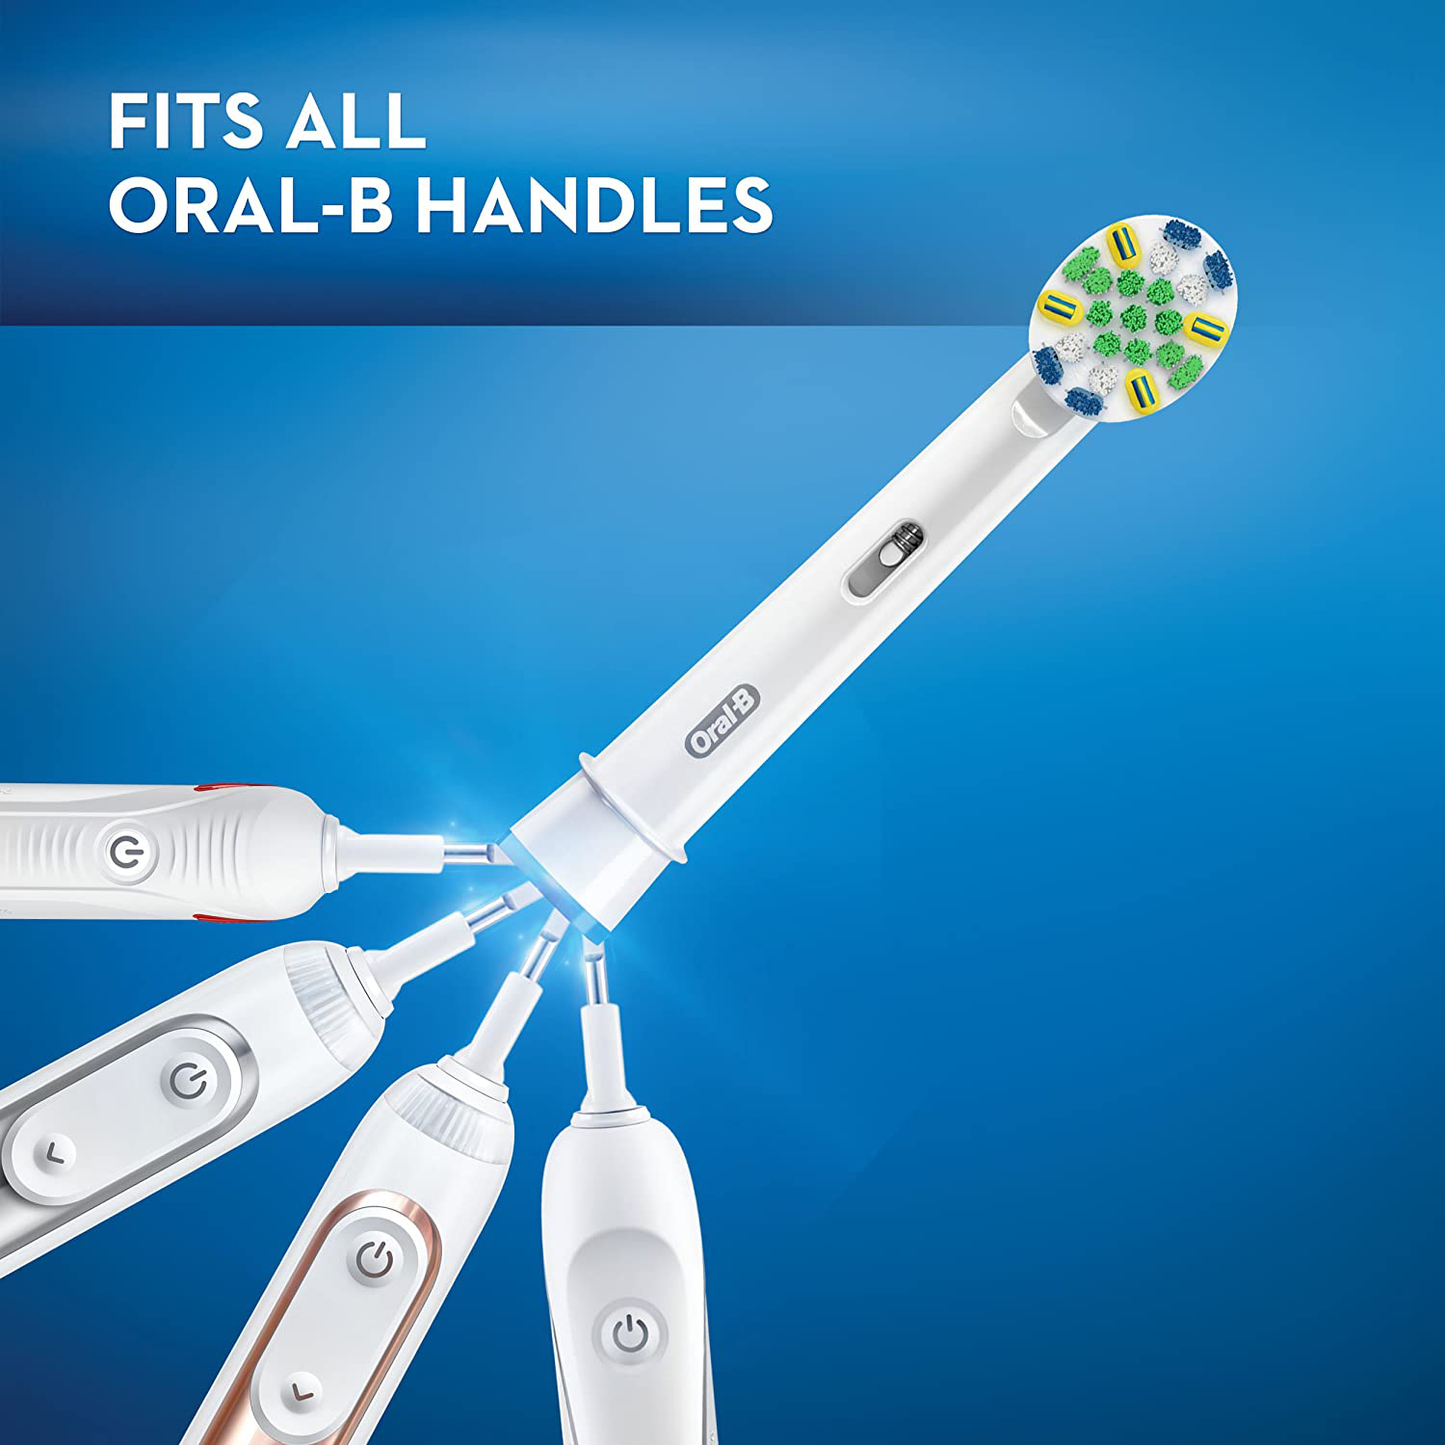 Oral-B Floss Action Electric Toothbrush Replacement Brush Heads Refill, 2 Count